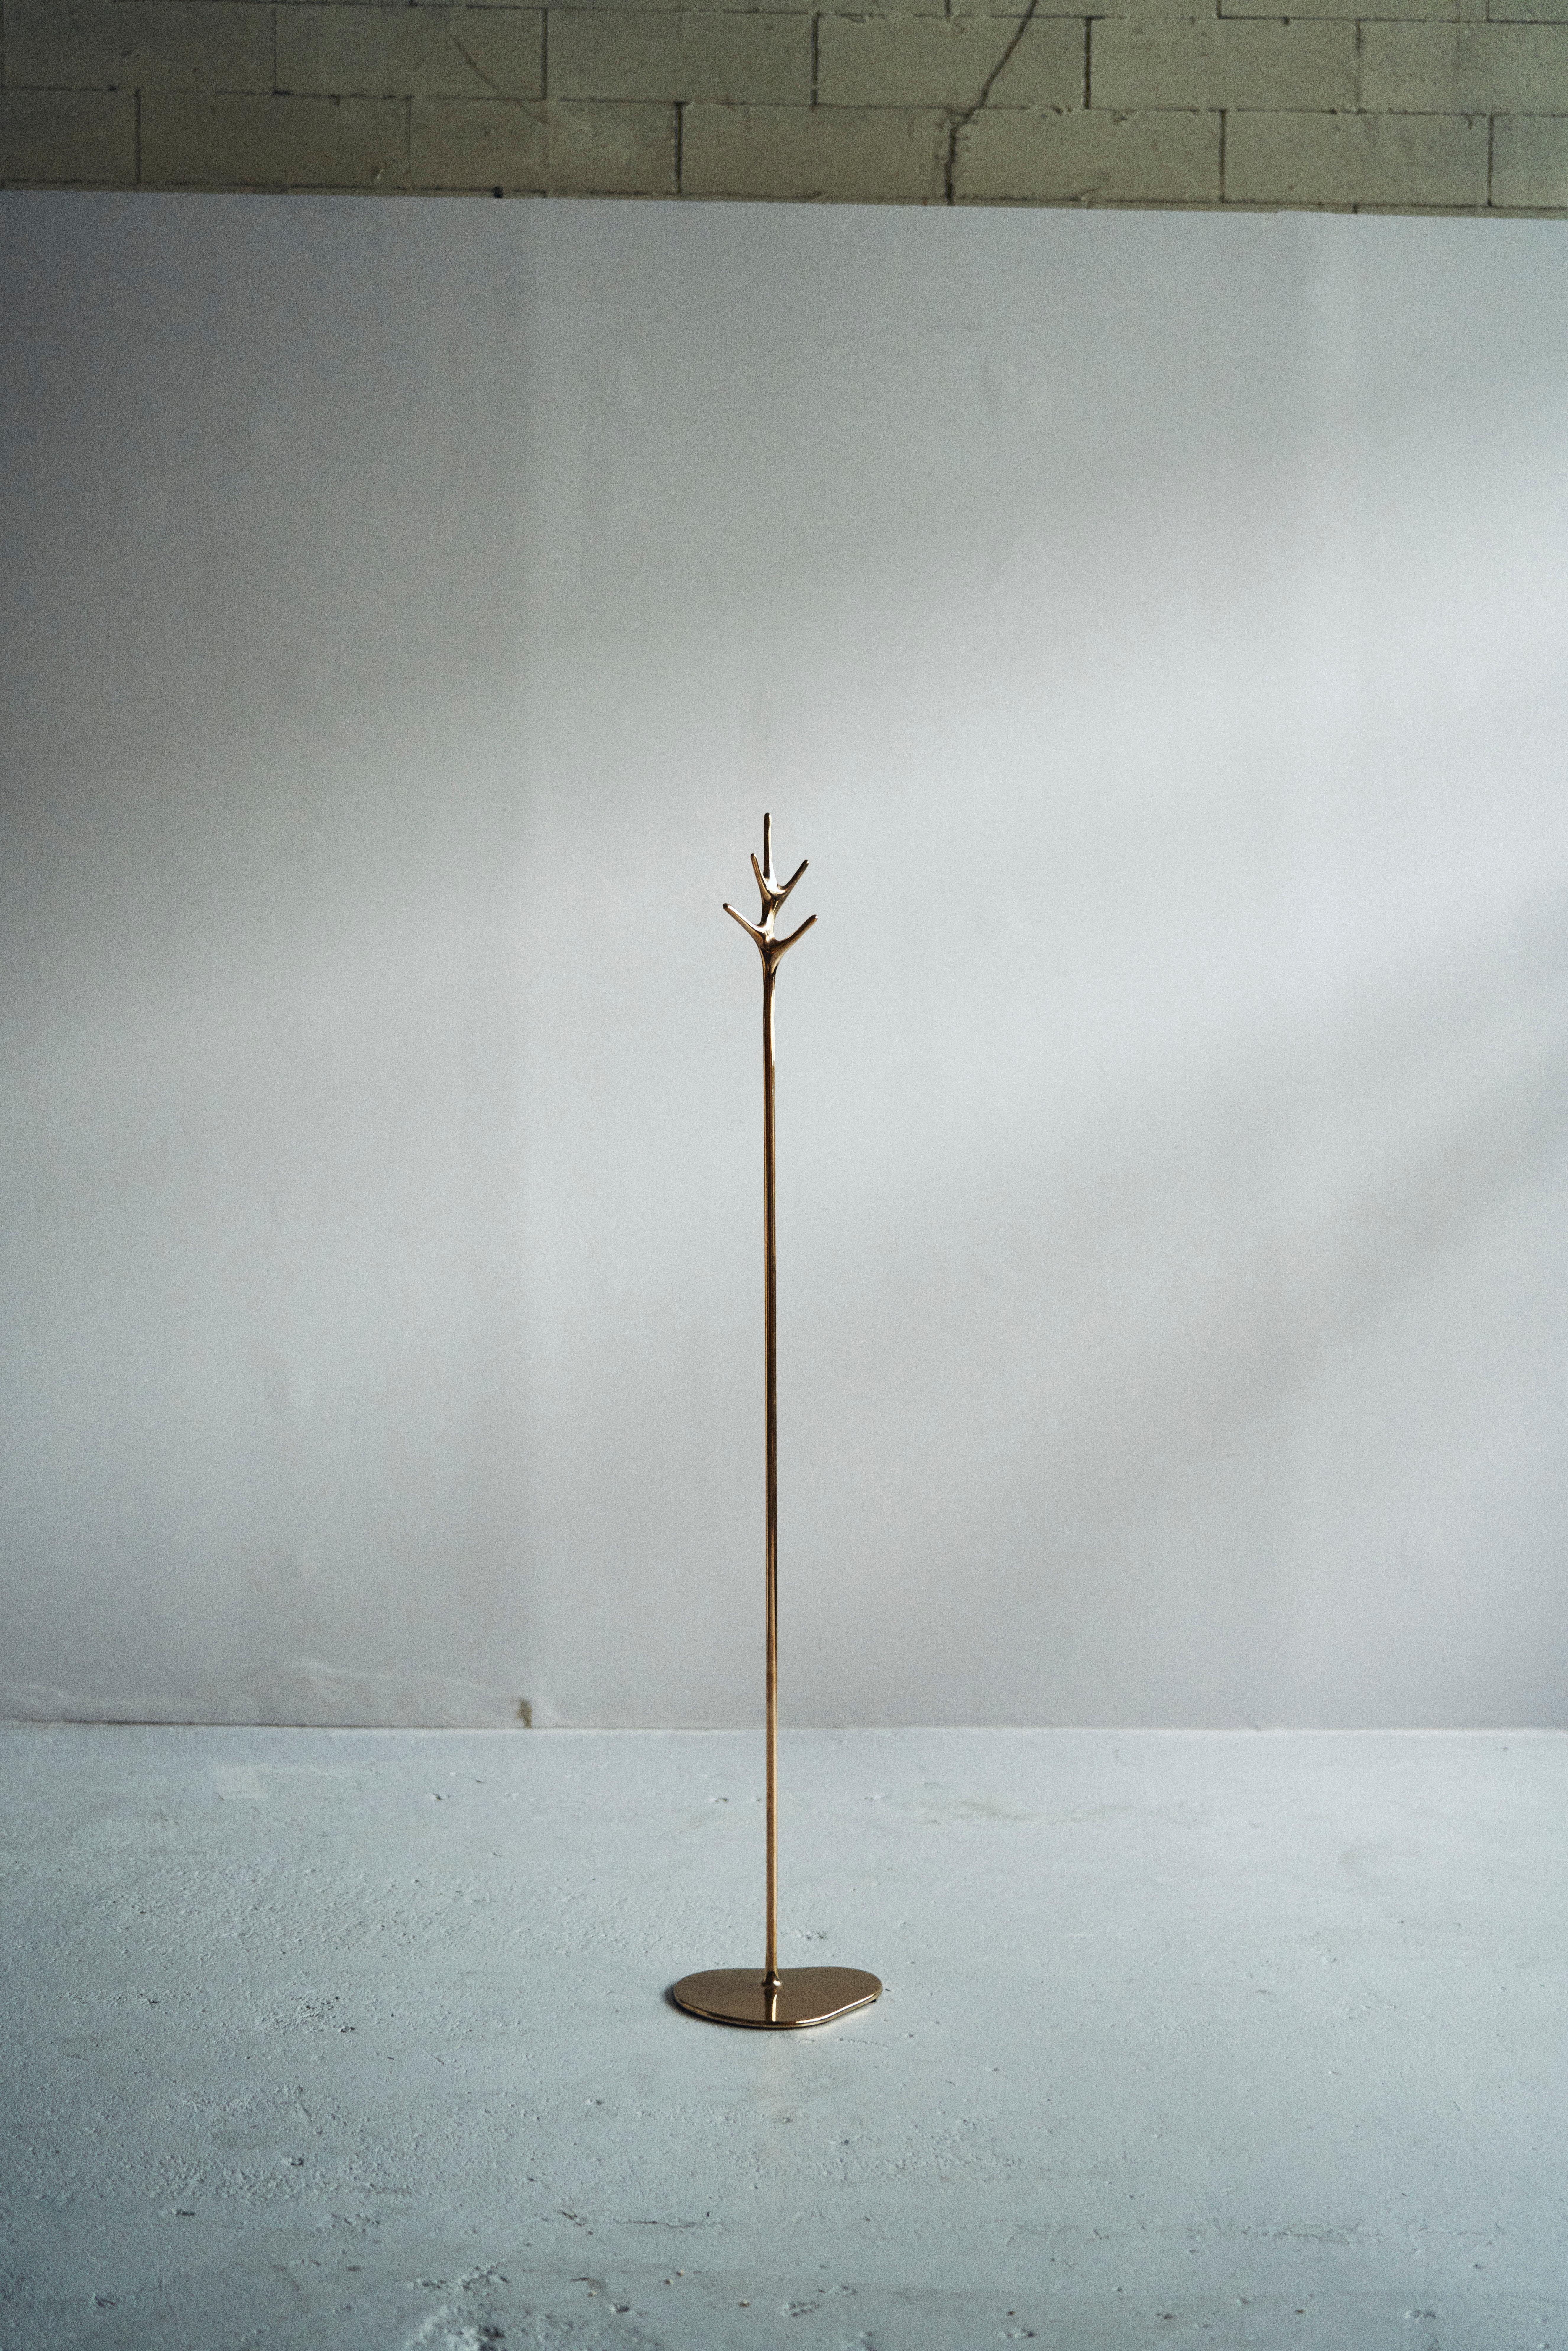 The 'Lovelock' coat stand is a stunning piece of art that combines elegance and utility. It was created by Daniel Barbera, a renowned designer who specializes in sandcasting techniques. The base of the coat stand is made from solid bronze that is